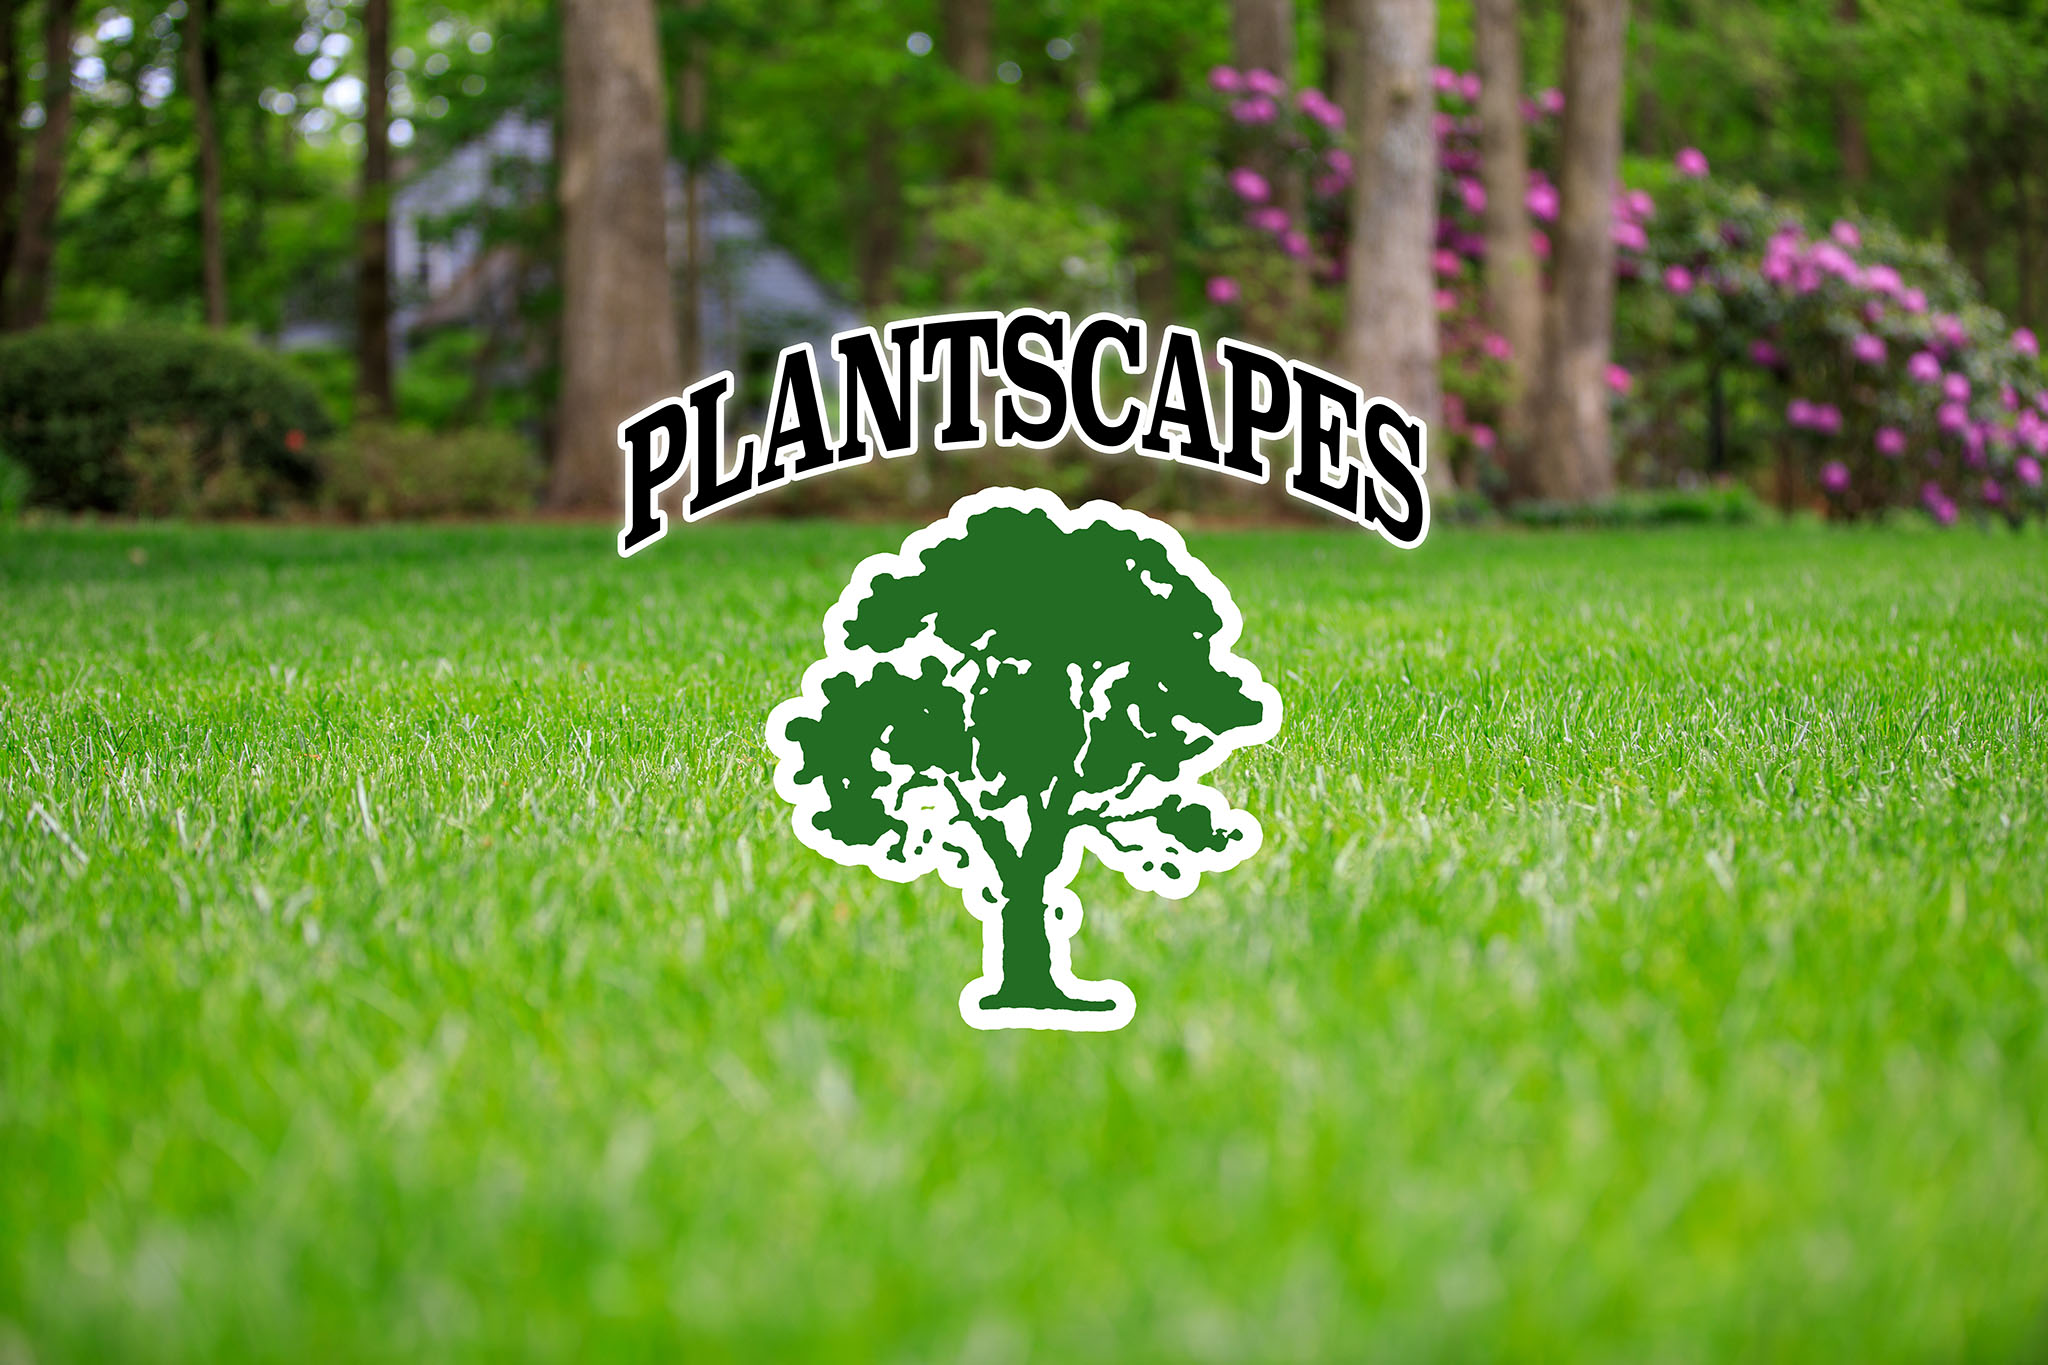 Plantscapes logo overlay on a beautifully manicured lawn